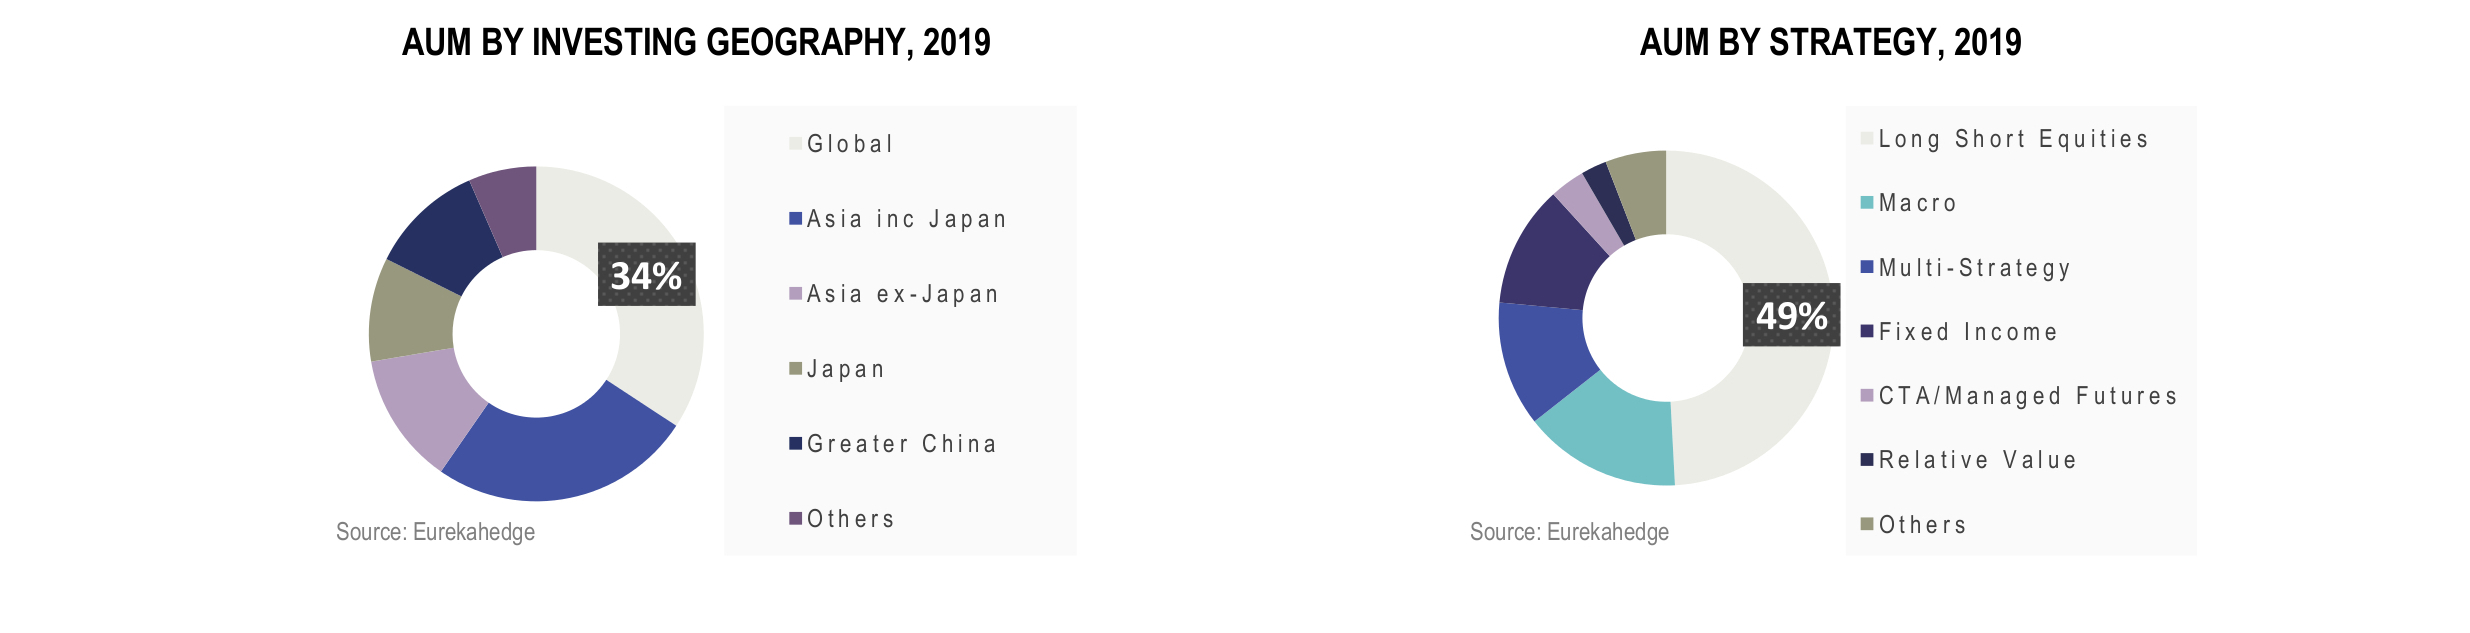 Asian Hedge Funds Infographic April 2019 - AUM by infesting geography and strategy